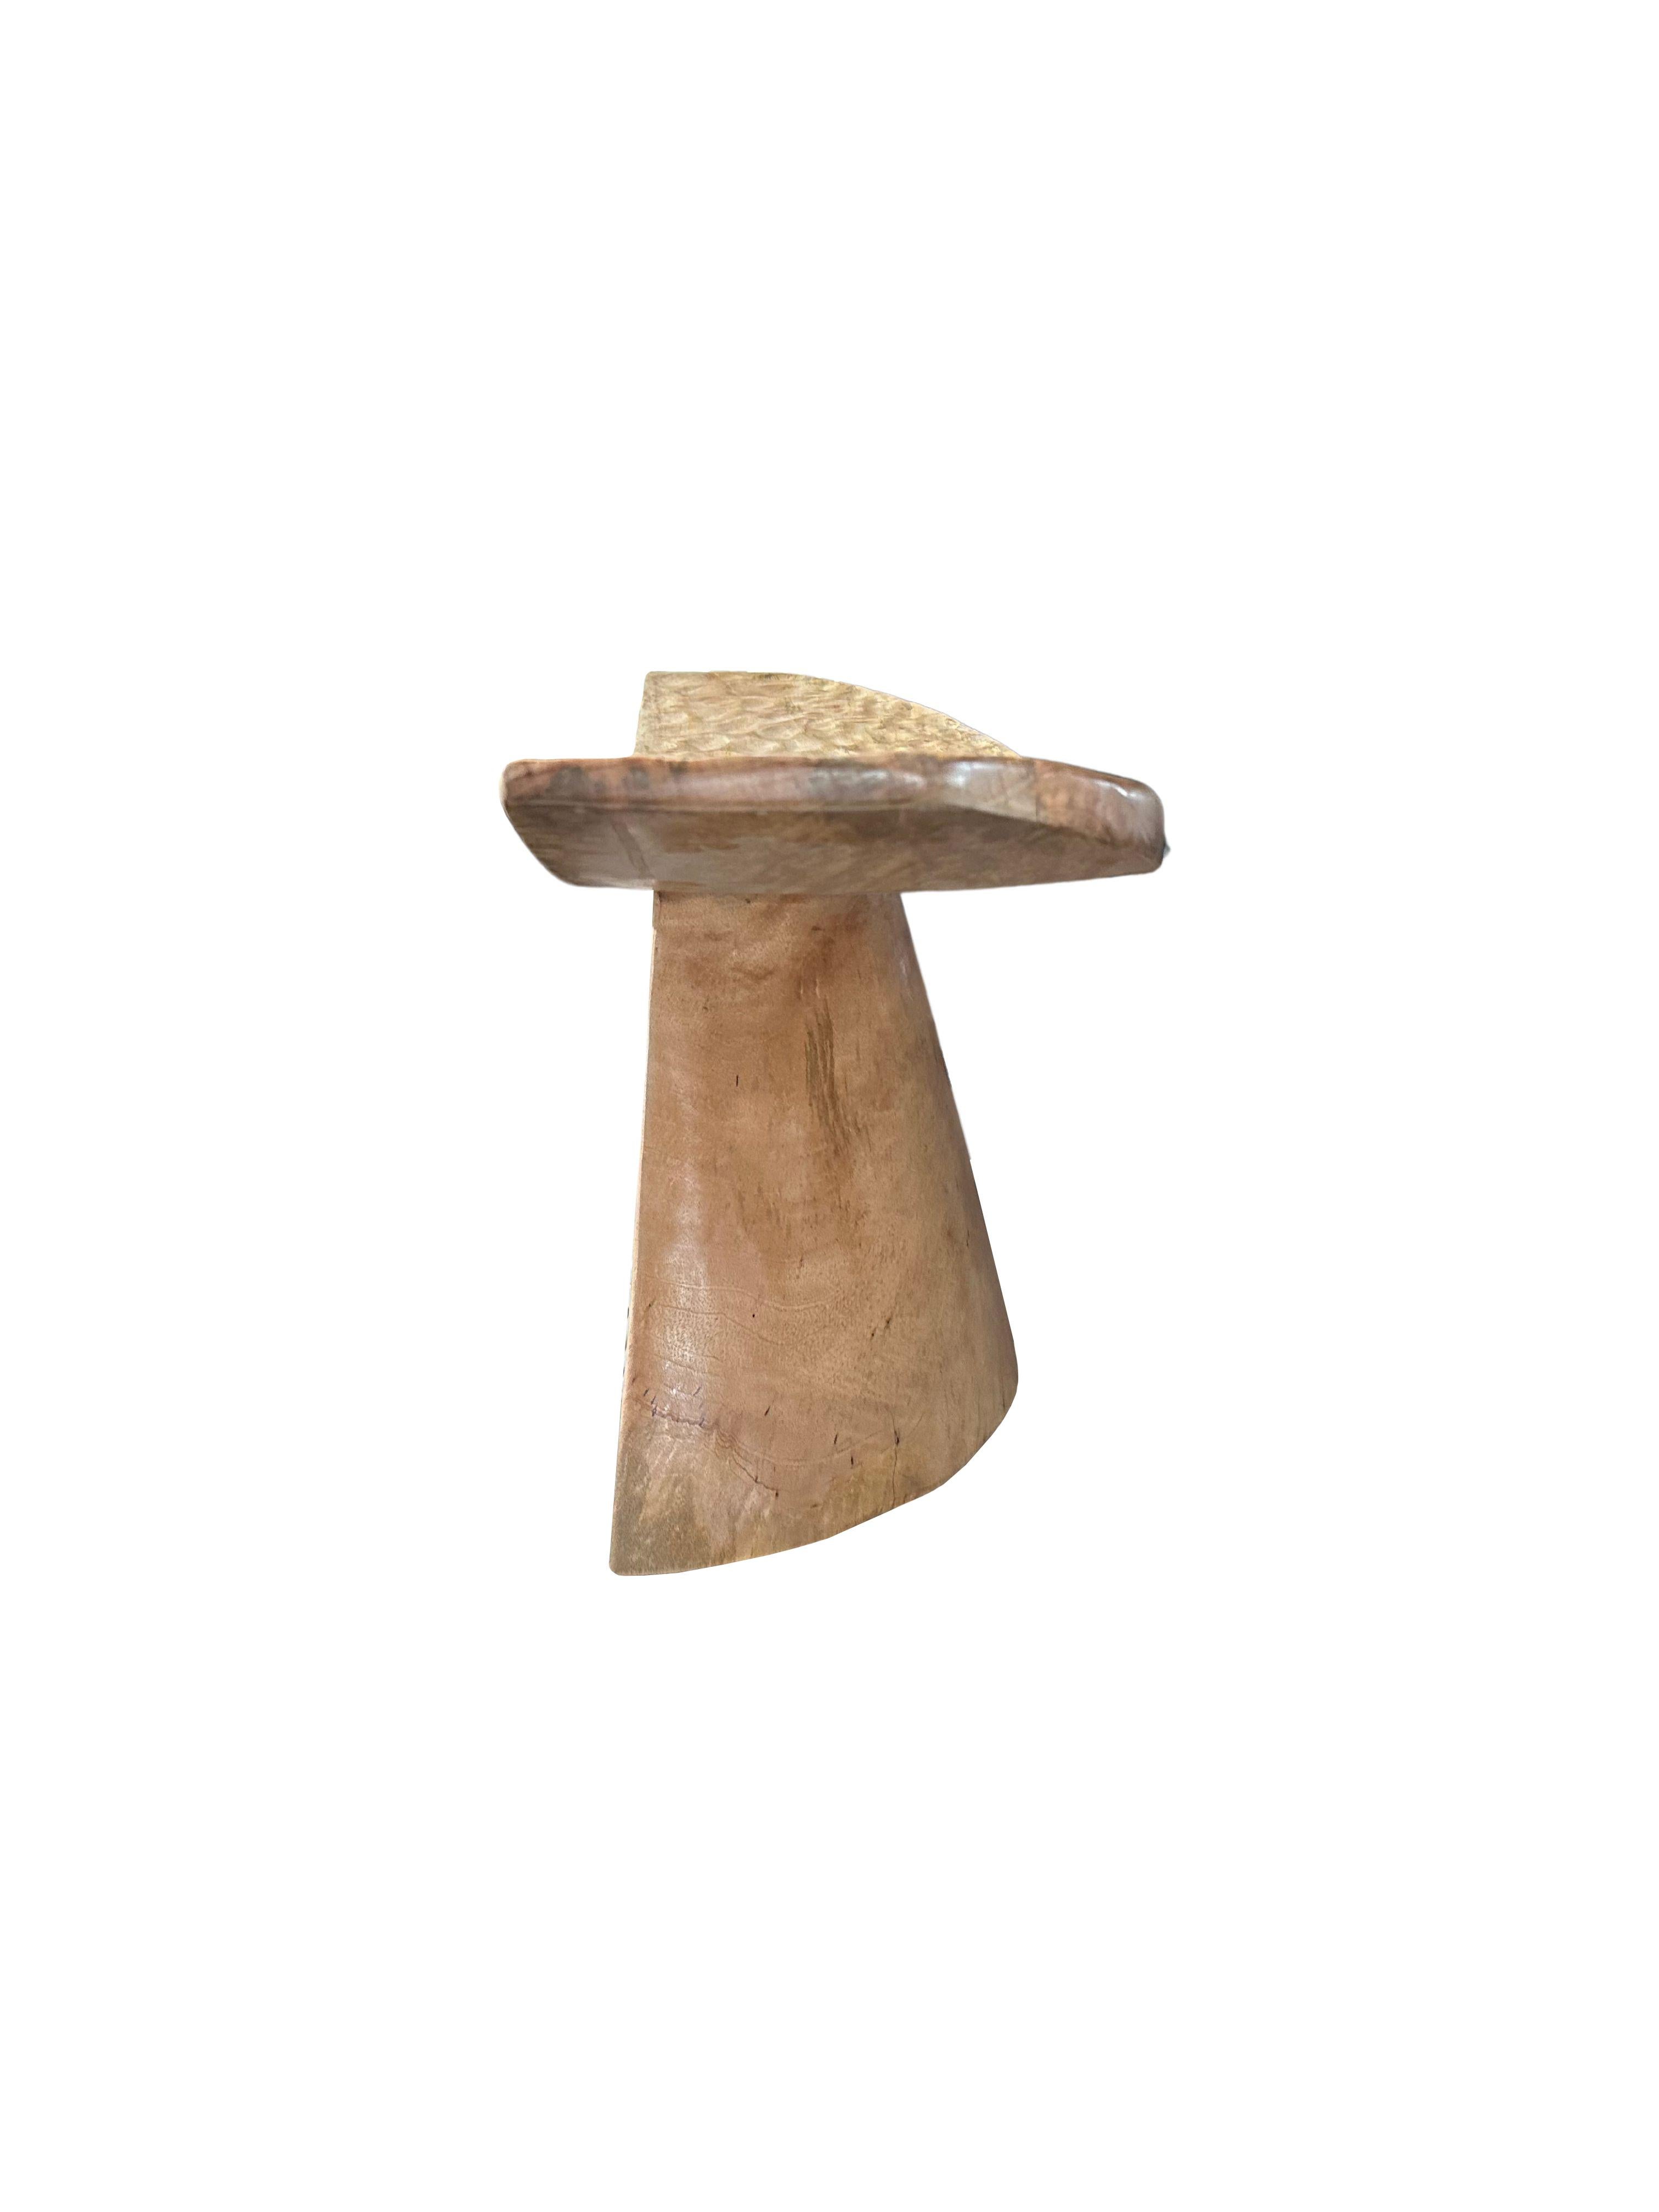 Organic Modern Sculptural Stool with Curved Seat & Hand Hewn Detailing, Natural Finish For Sale